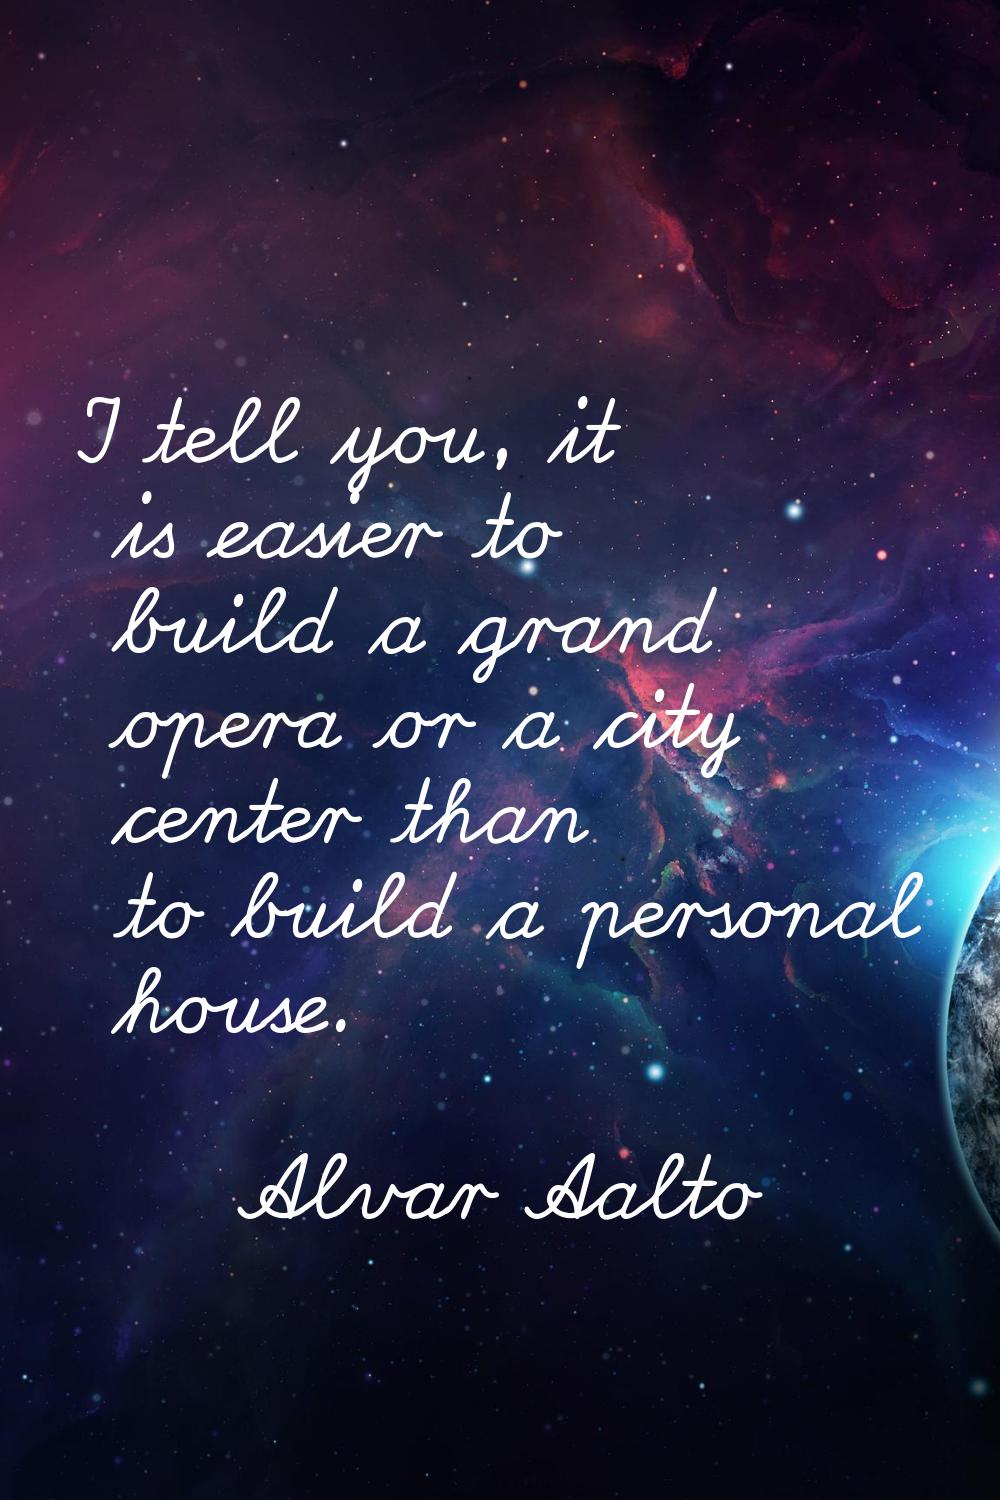 I tell you, it is easier to build a grand opera or a city center than to build a personal house.